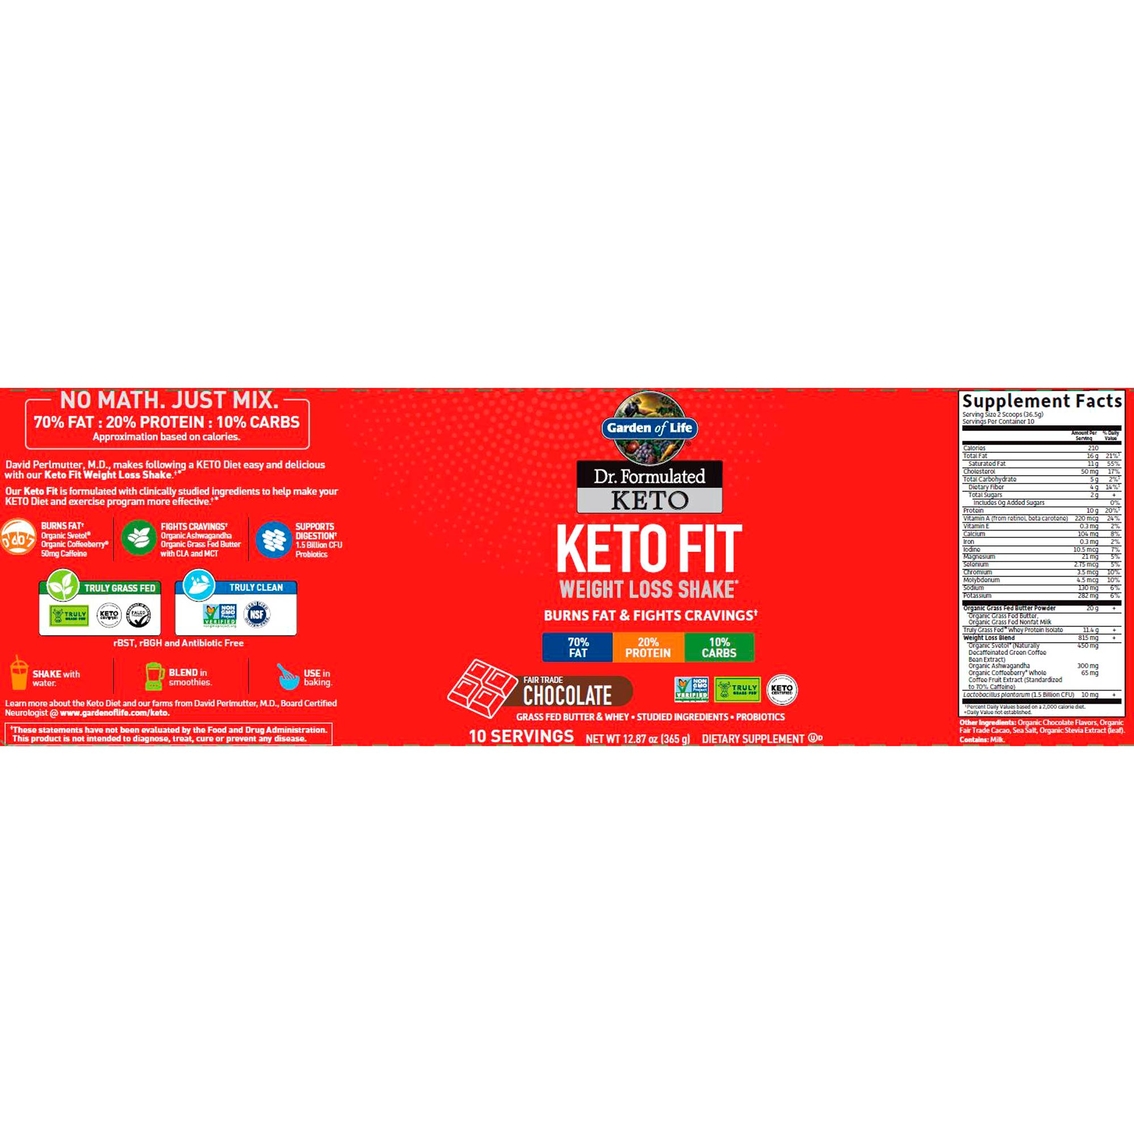 Garden of Life Dr. Formulated Keto Fit Chocolate Nutritional Supplements 10 ct. - Image 2 of 2